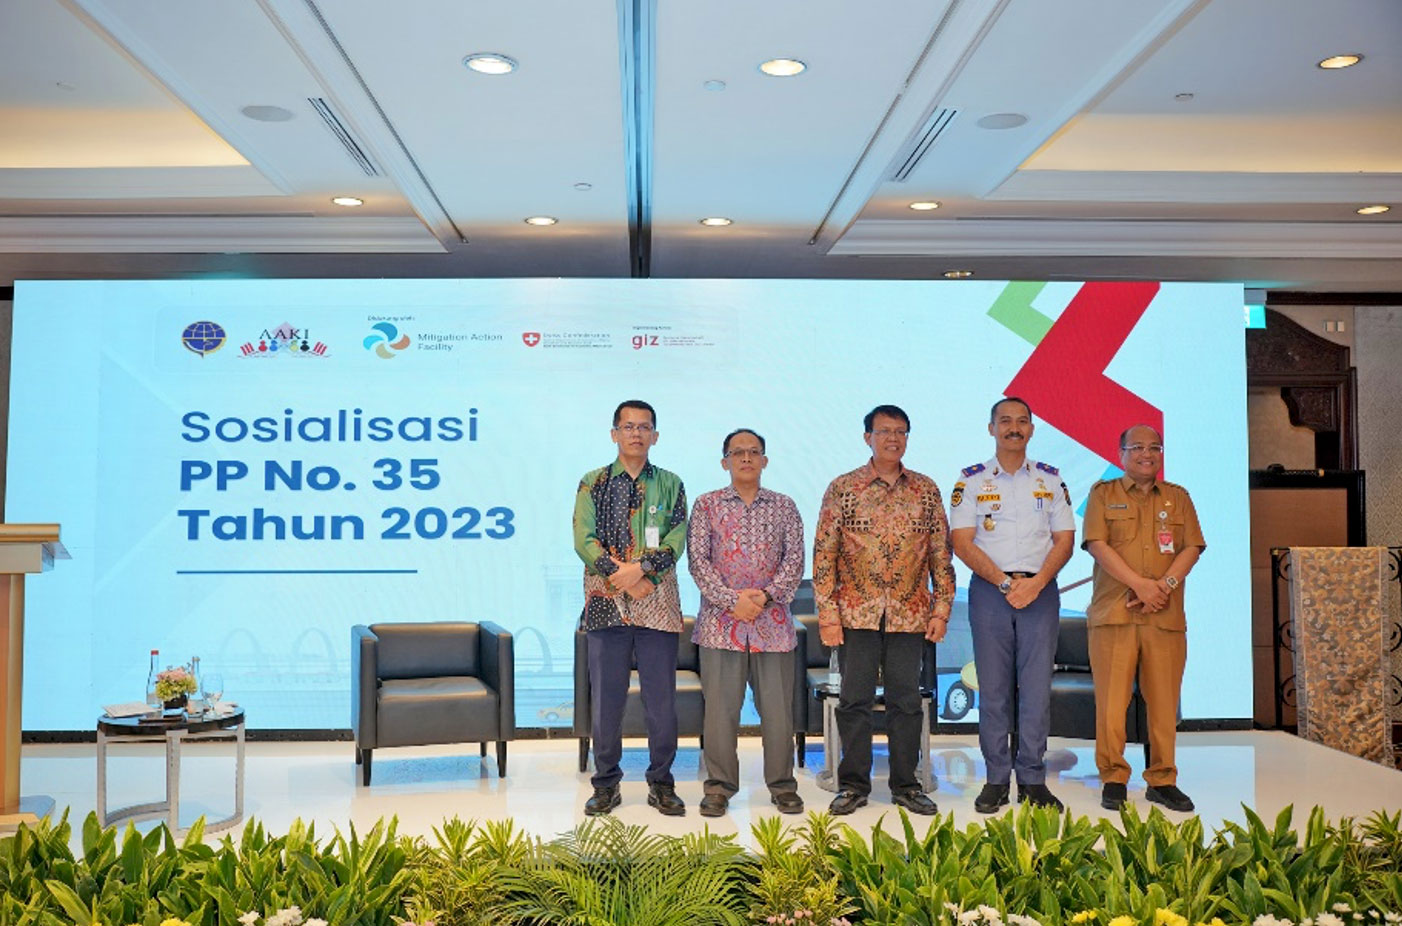 Left to Right: Ministry of Transportation, Ministry of National Development Planning, Asosiasi Analis Kebijakan Indonesia (AAKI), Pekanbaru Transportation Agency, and Ministry of Home Affairs